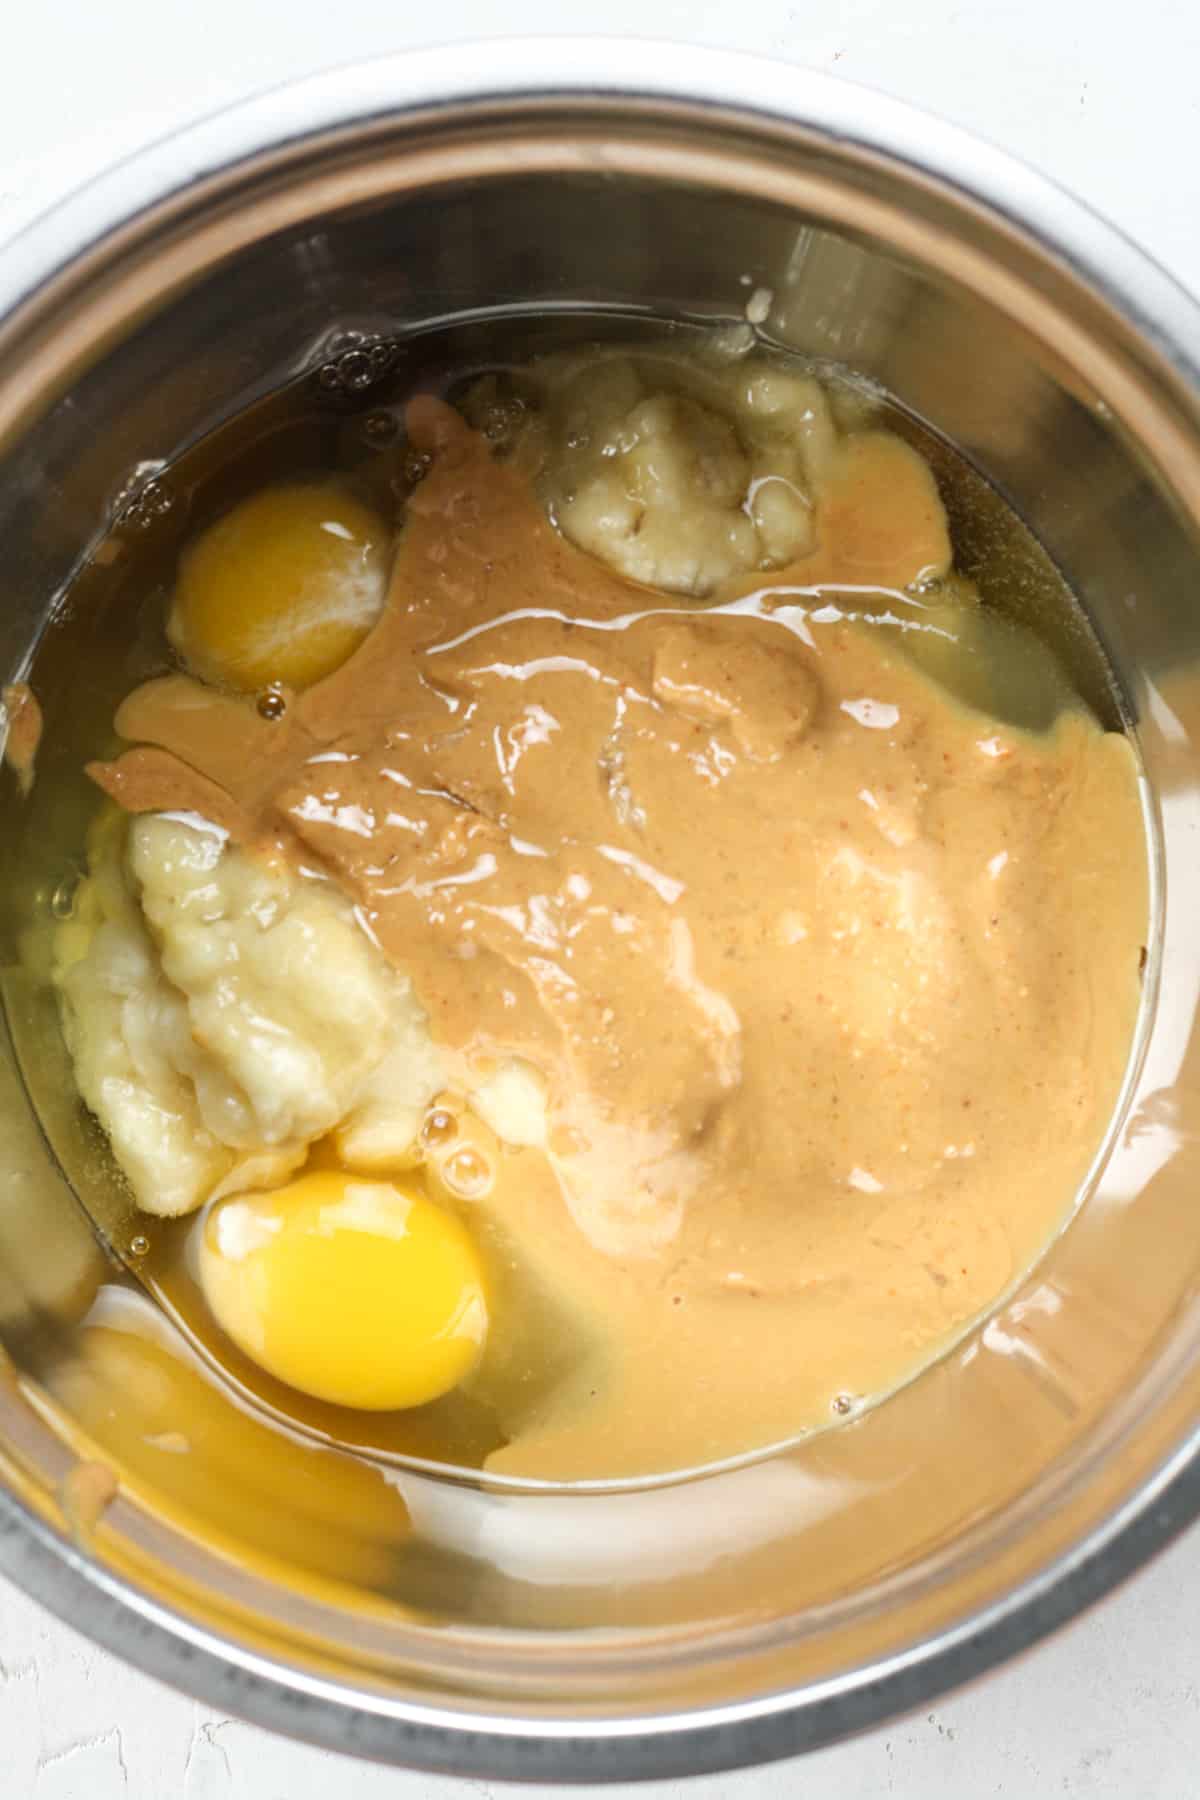 Peanut butter and eggs in bowl.